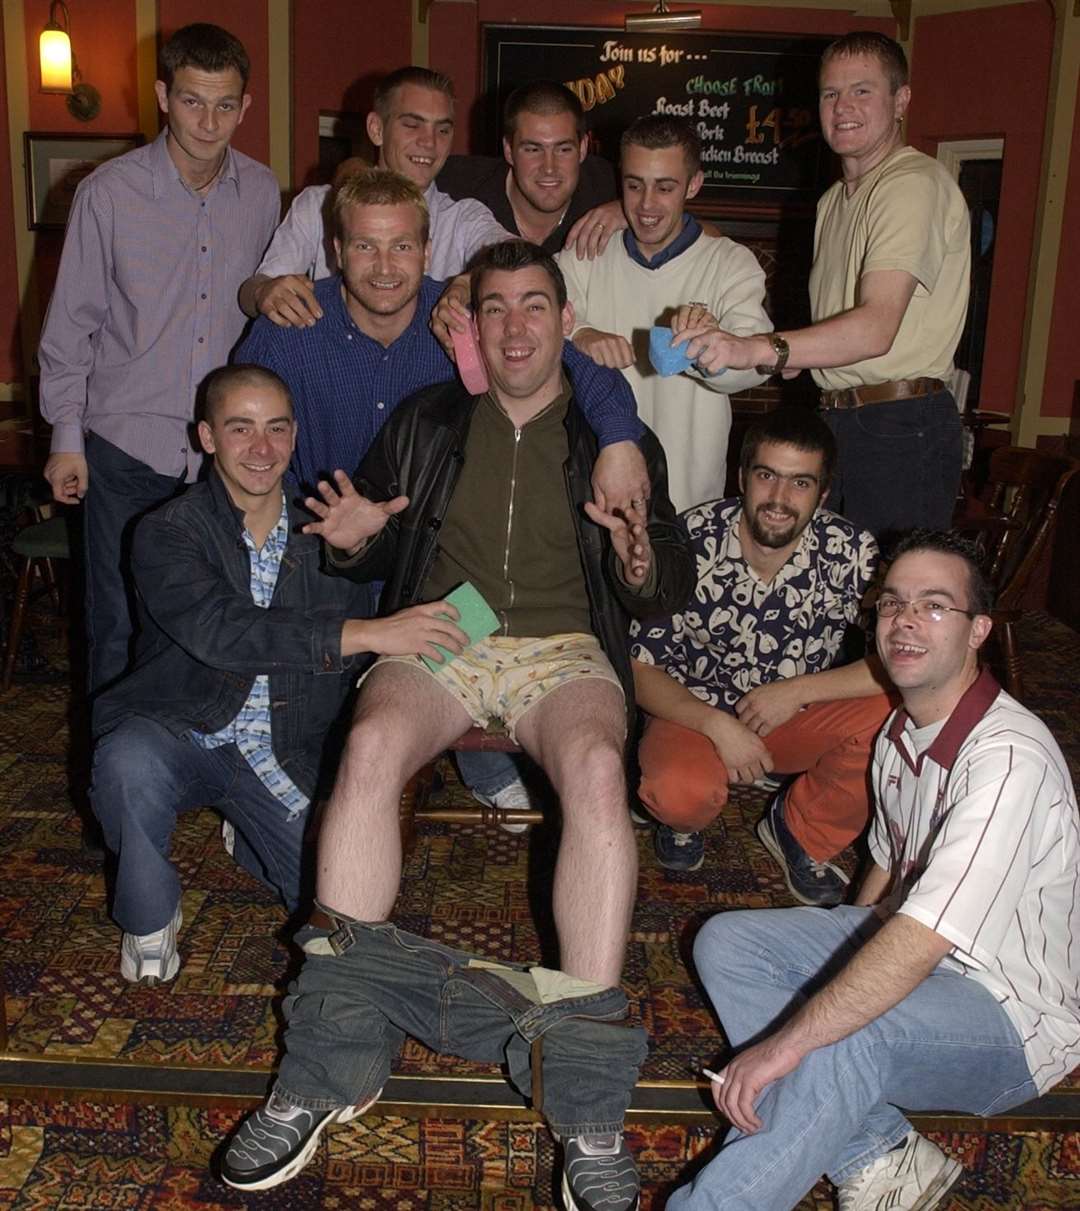 A punter gets ready for a leg shave at a charity night at The Black Bull pub in Folkestone in October 2002. The Black Bull is still going but is now part of the Hungry Horse chain. Picture: Dave Downey